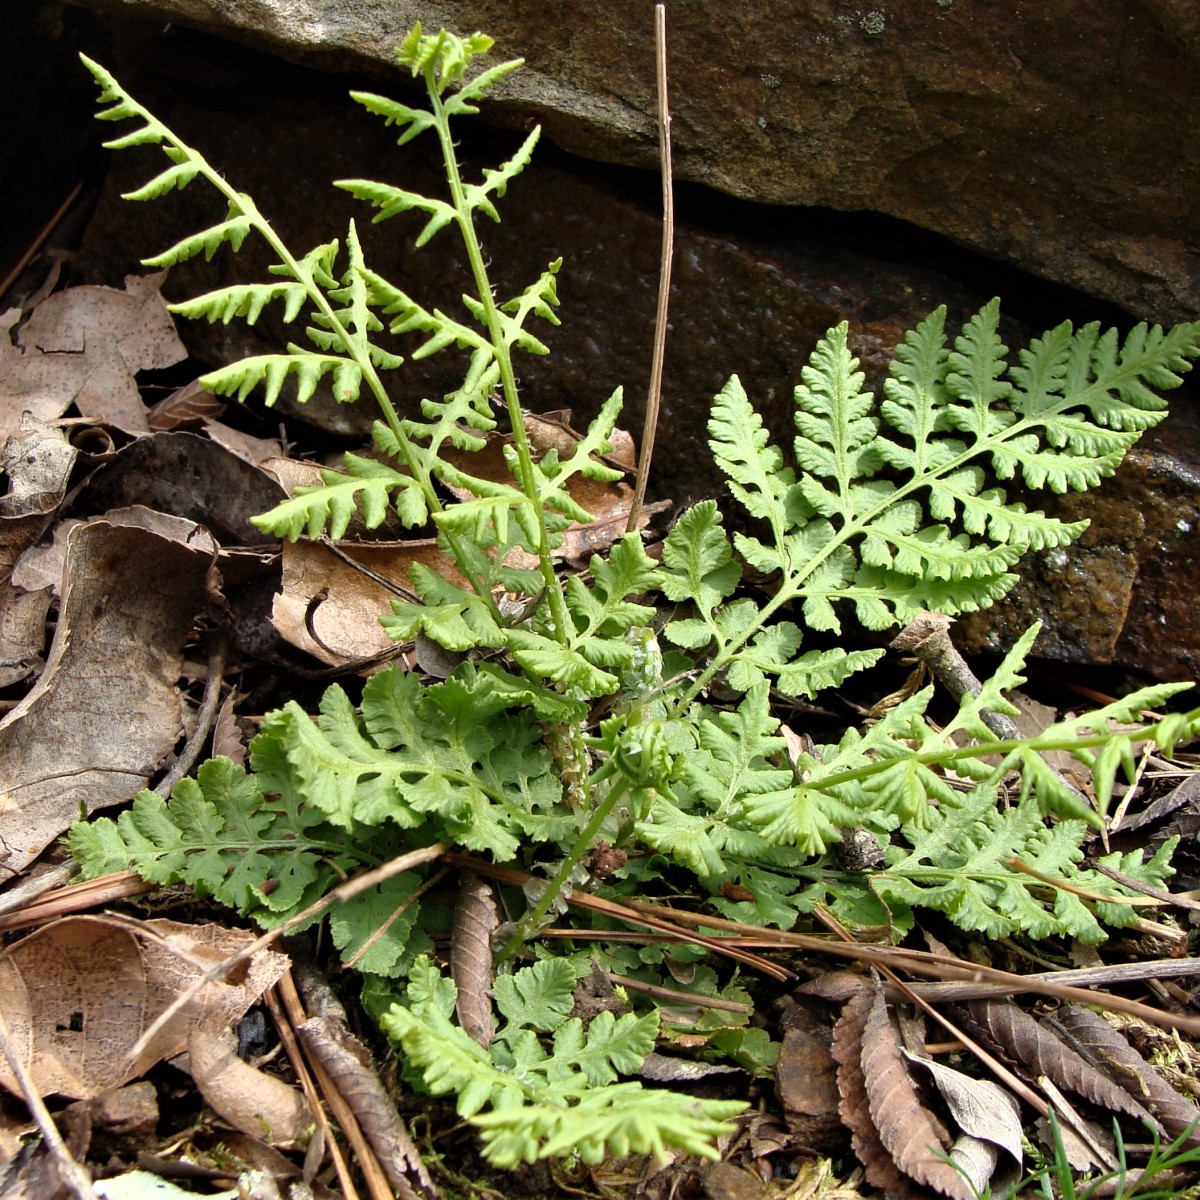 Know Your Natives – Blunt Lobed Woodsia